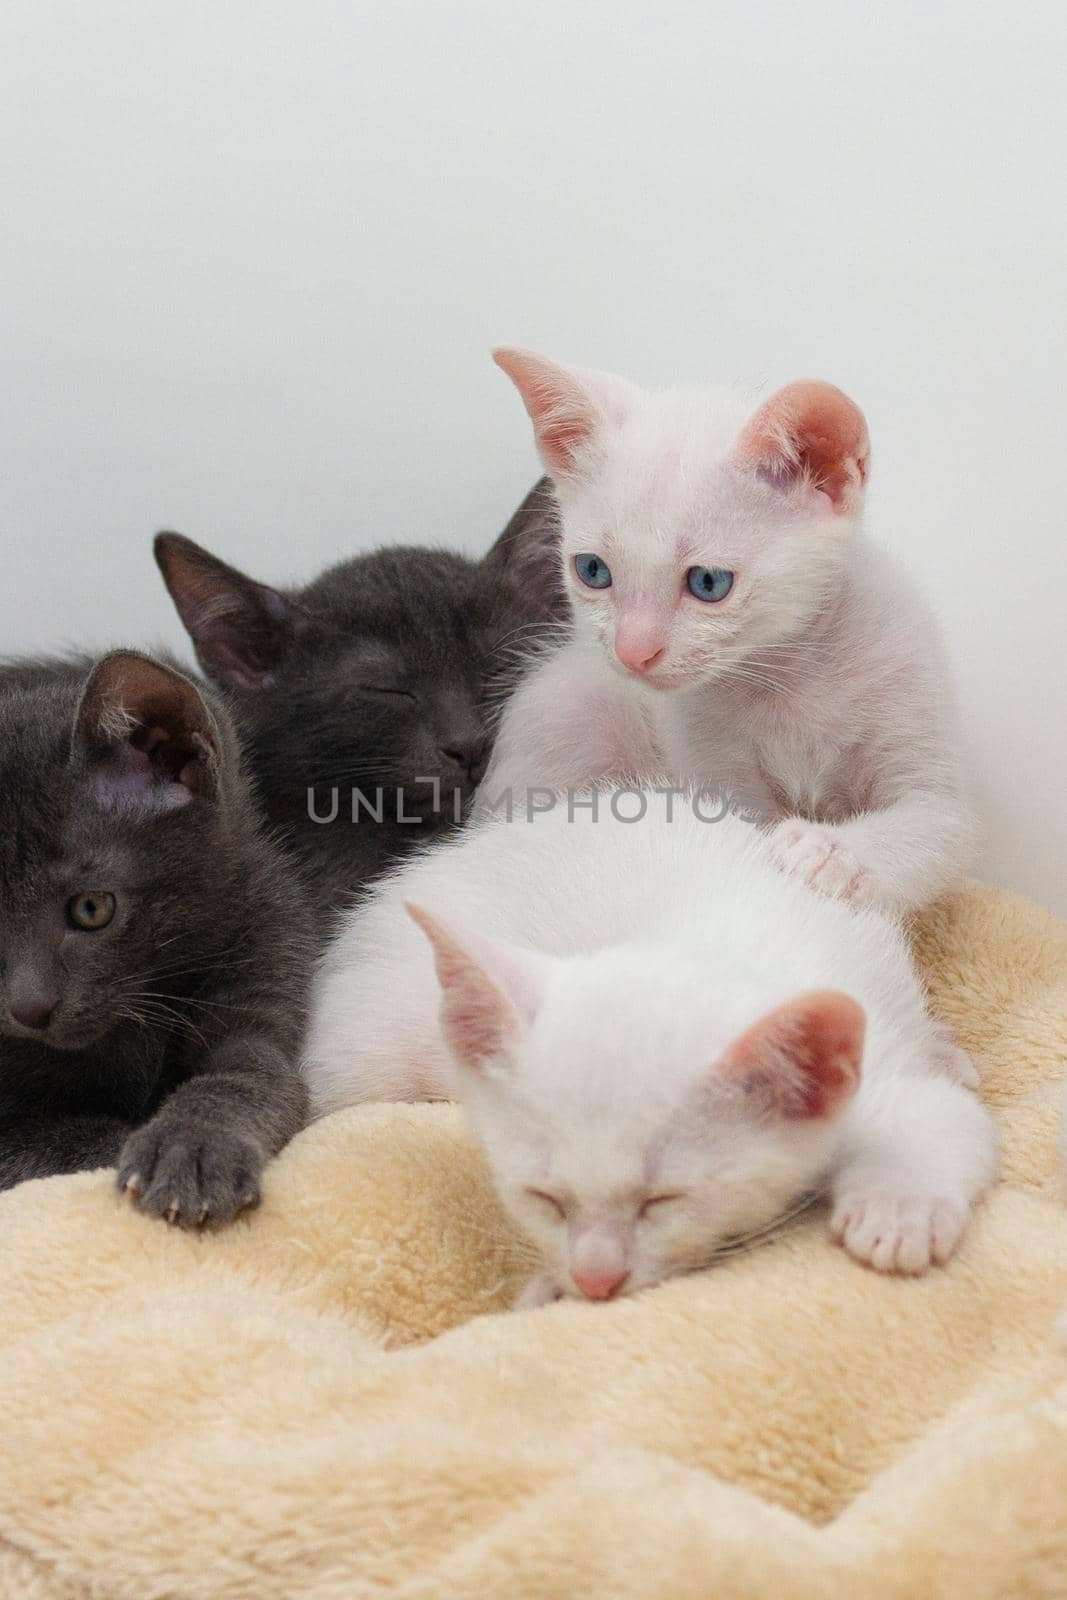 White kittens with blue eyes and black kittens playing with their siblings